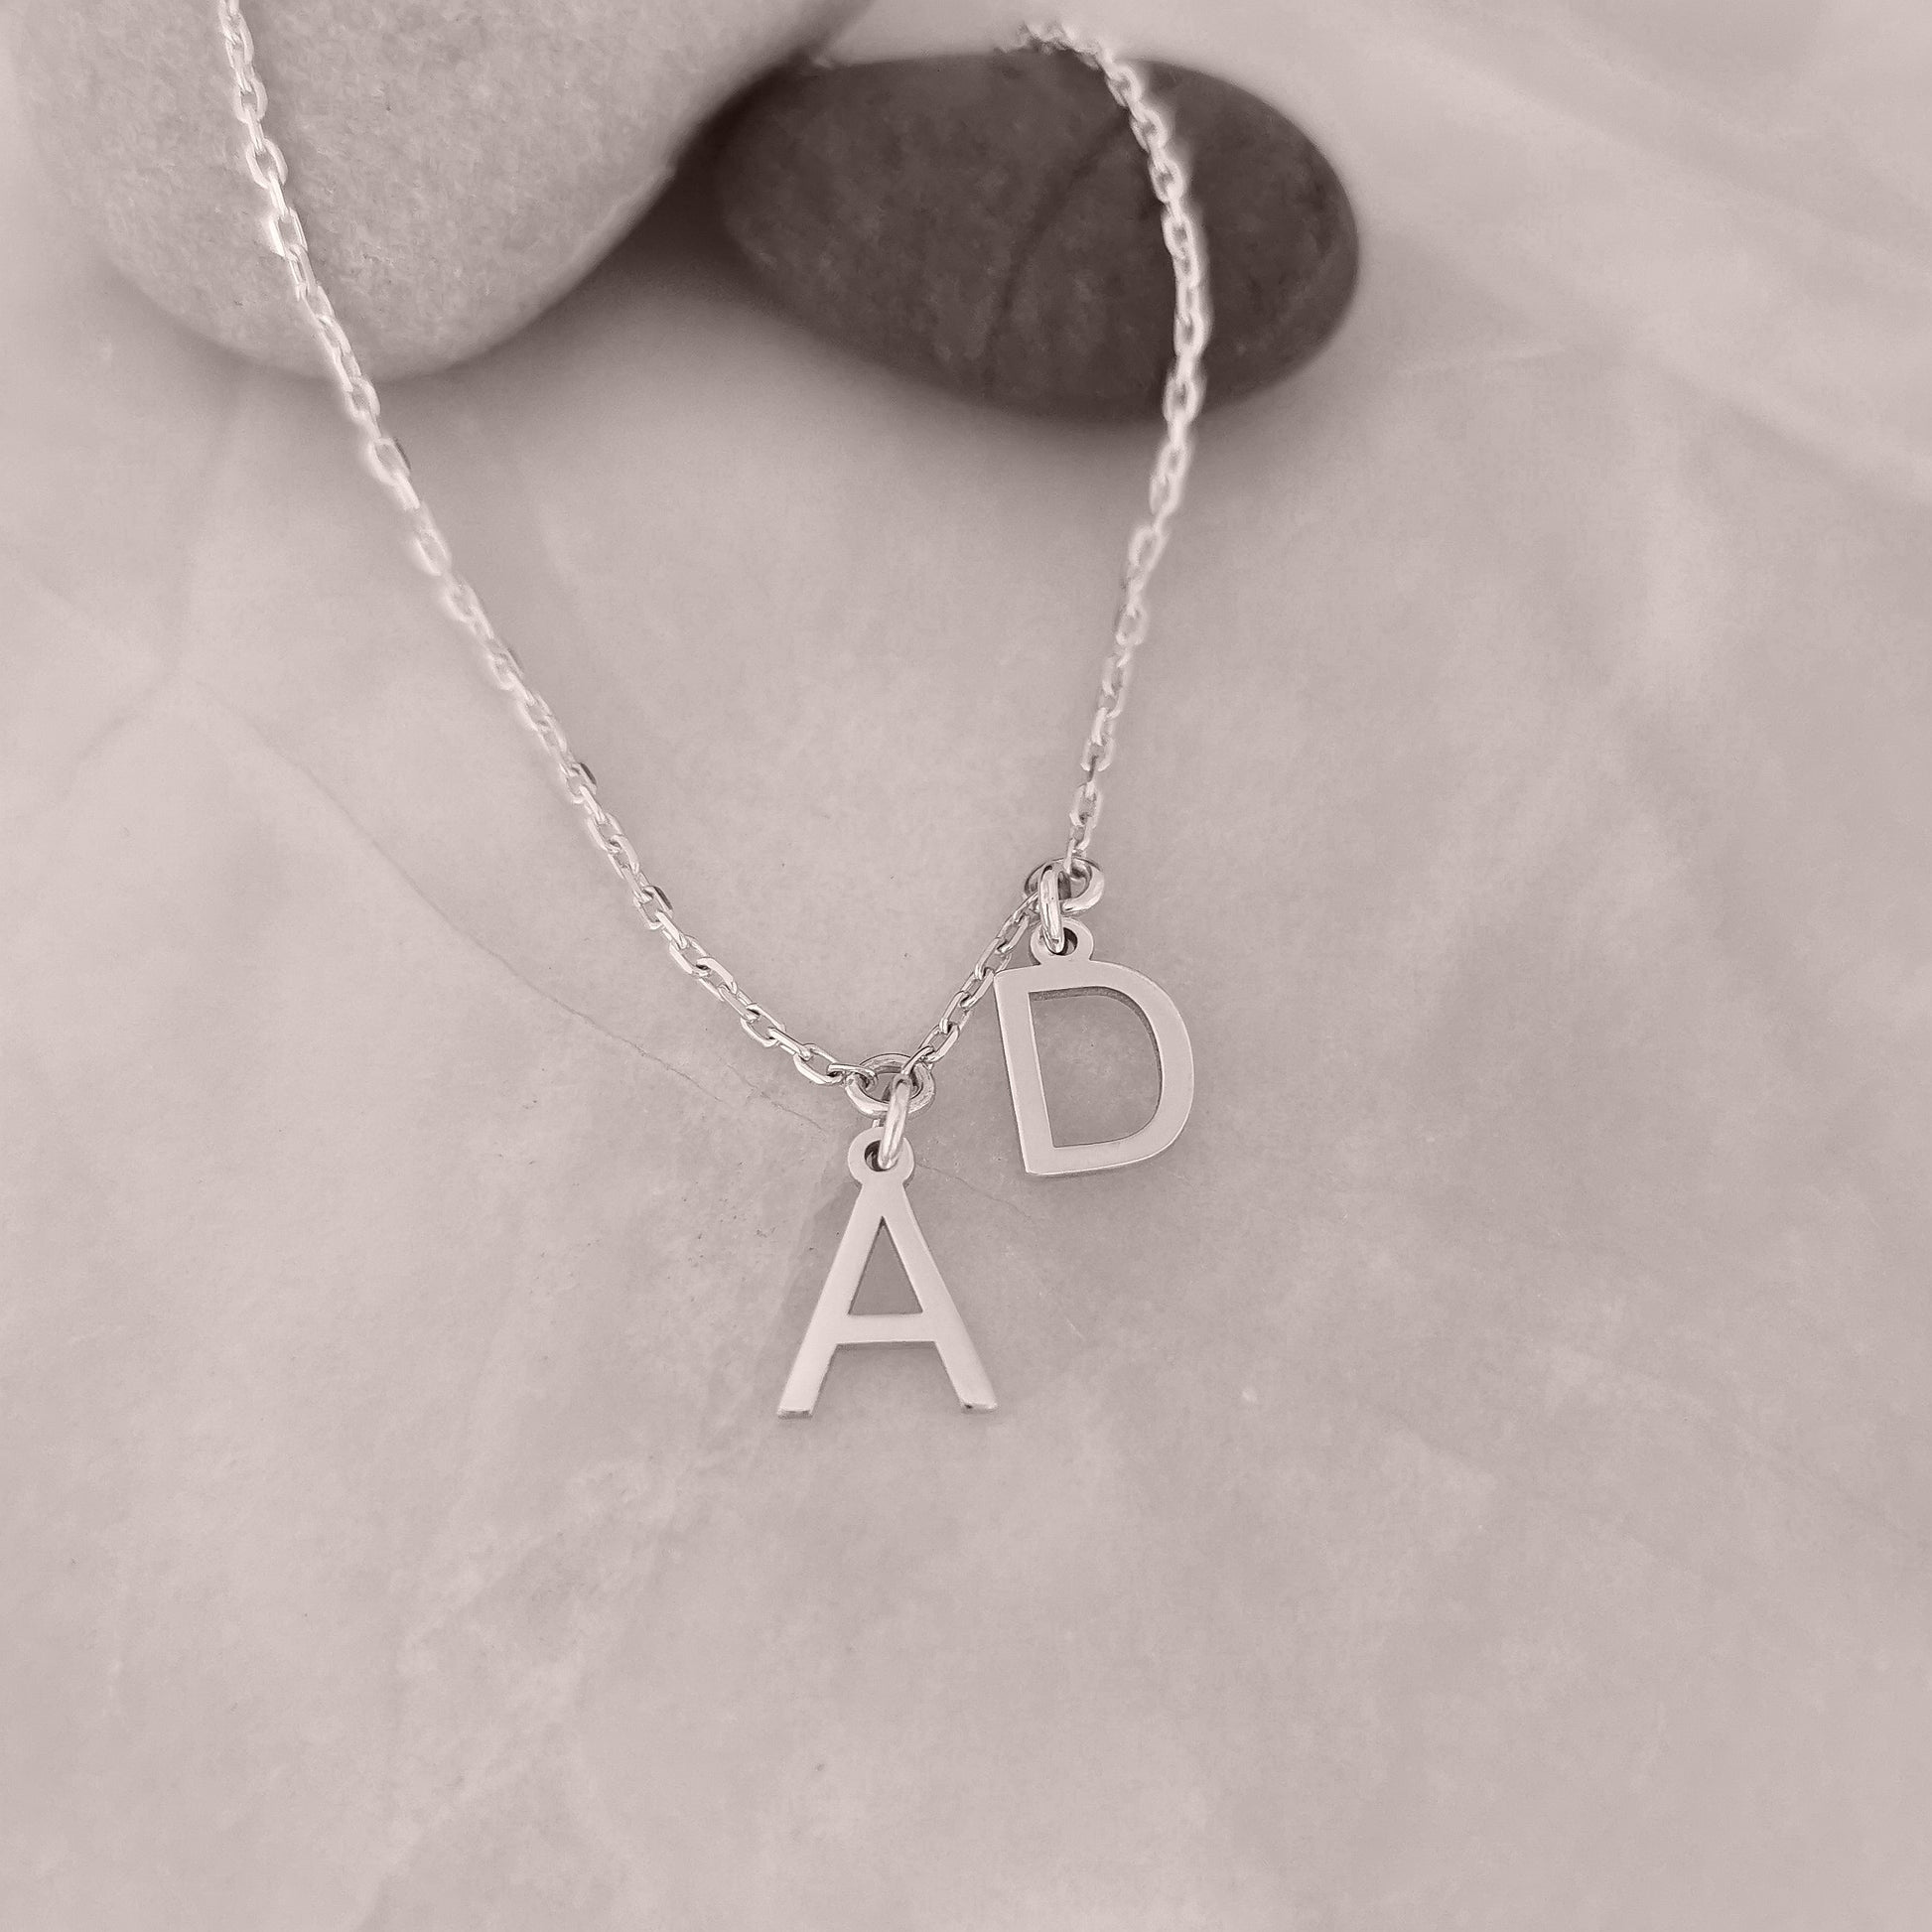 Solid Silver Initial Necklace with Two Initials Charms Attached